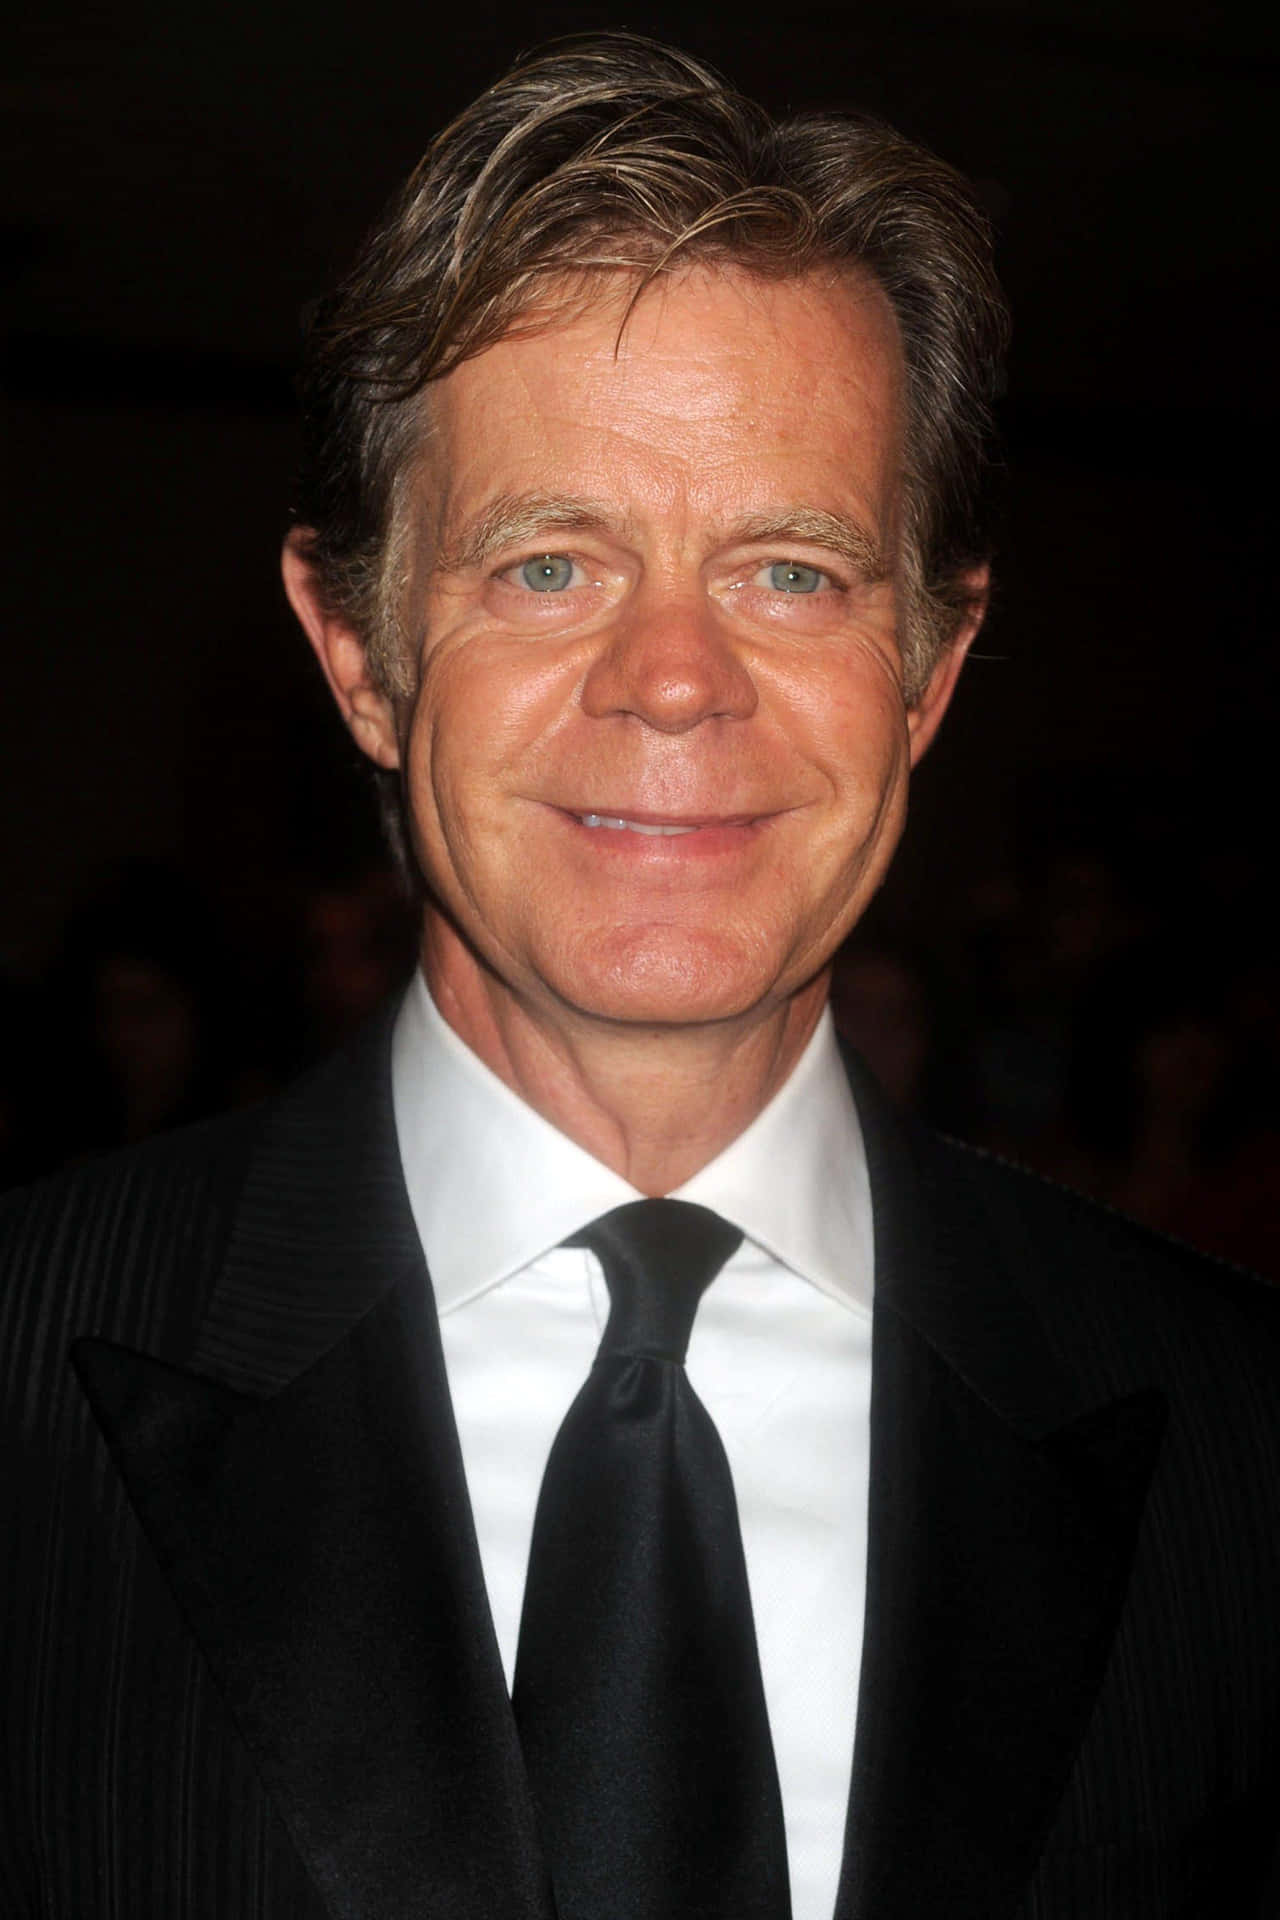 William H. Macy posing at a red carpet event Wallpaper